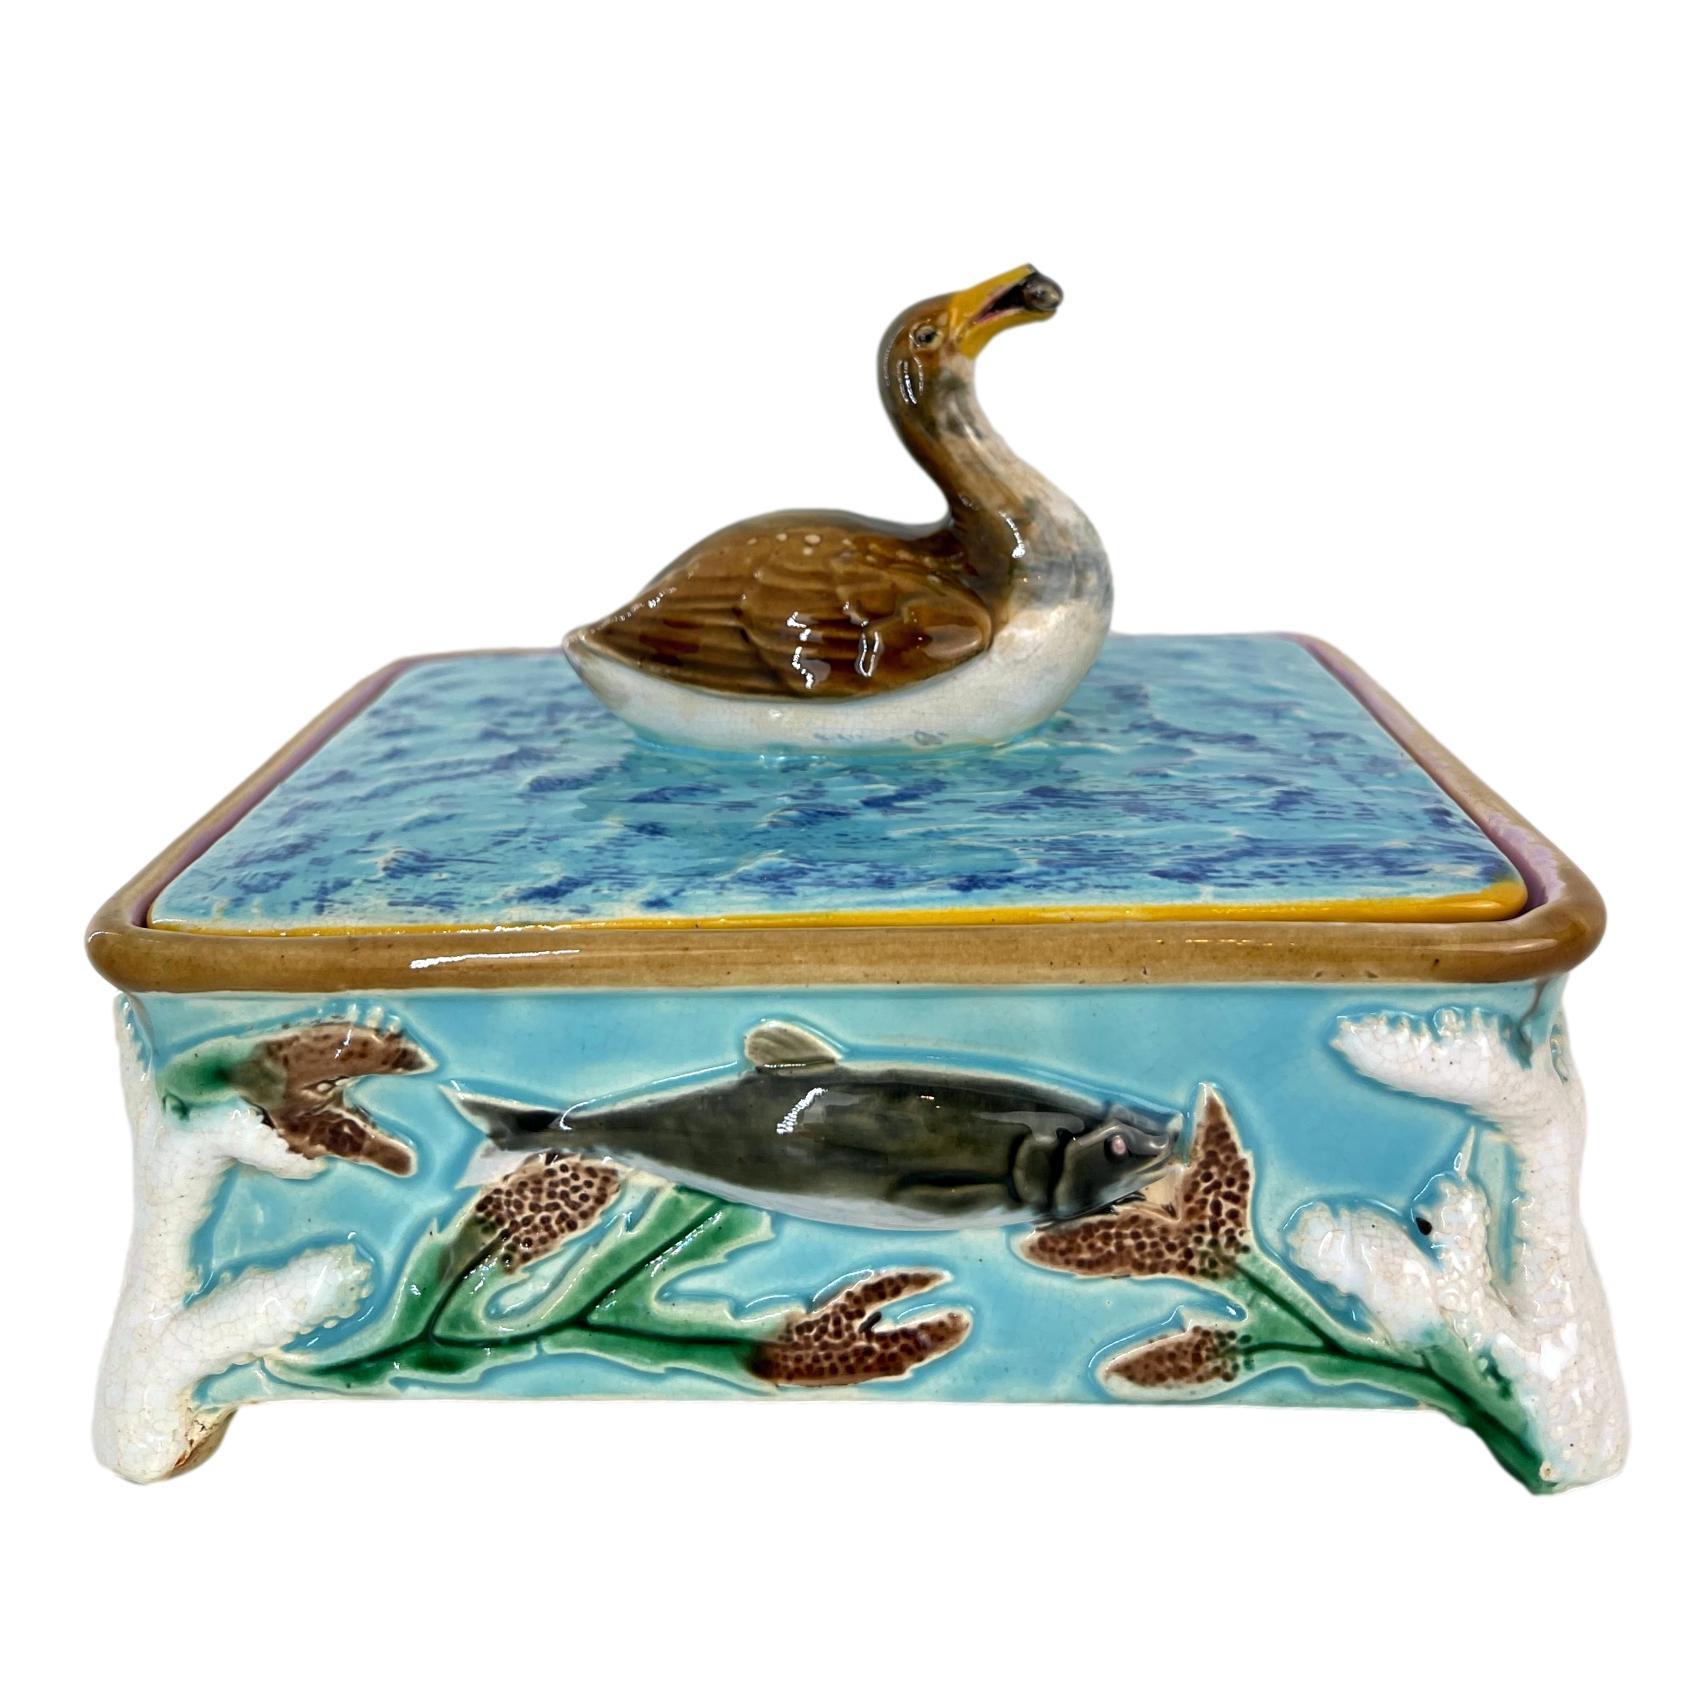 George Jones Majolica Turquoise Sardine Box, Duck (actually a Grebe) and Fish, English, ca. 1874, the box molded in high relief with a salmon on each of the four sides, each corner with molded coral forming the raised feet, the lid with simulated